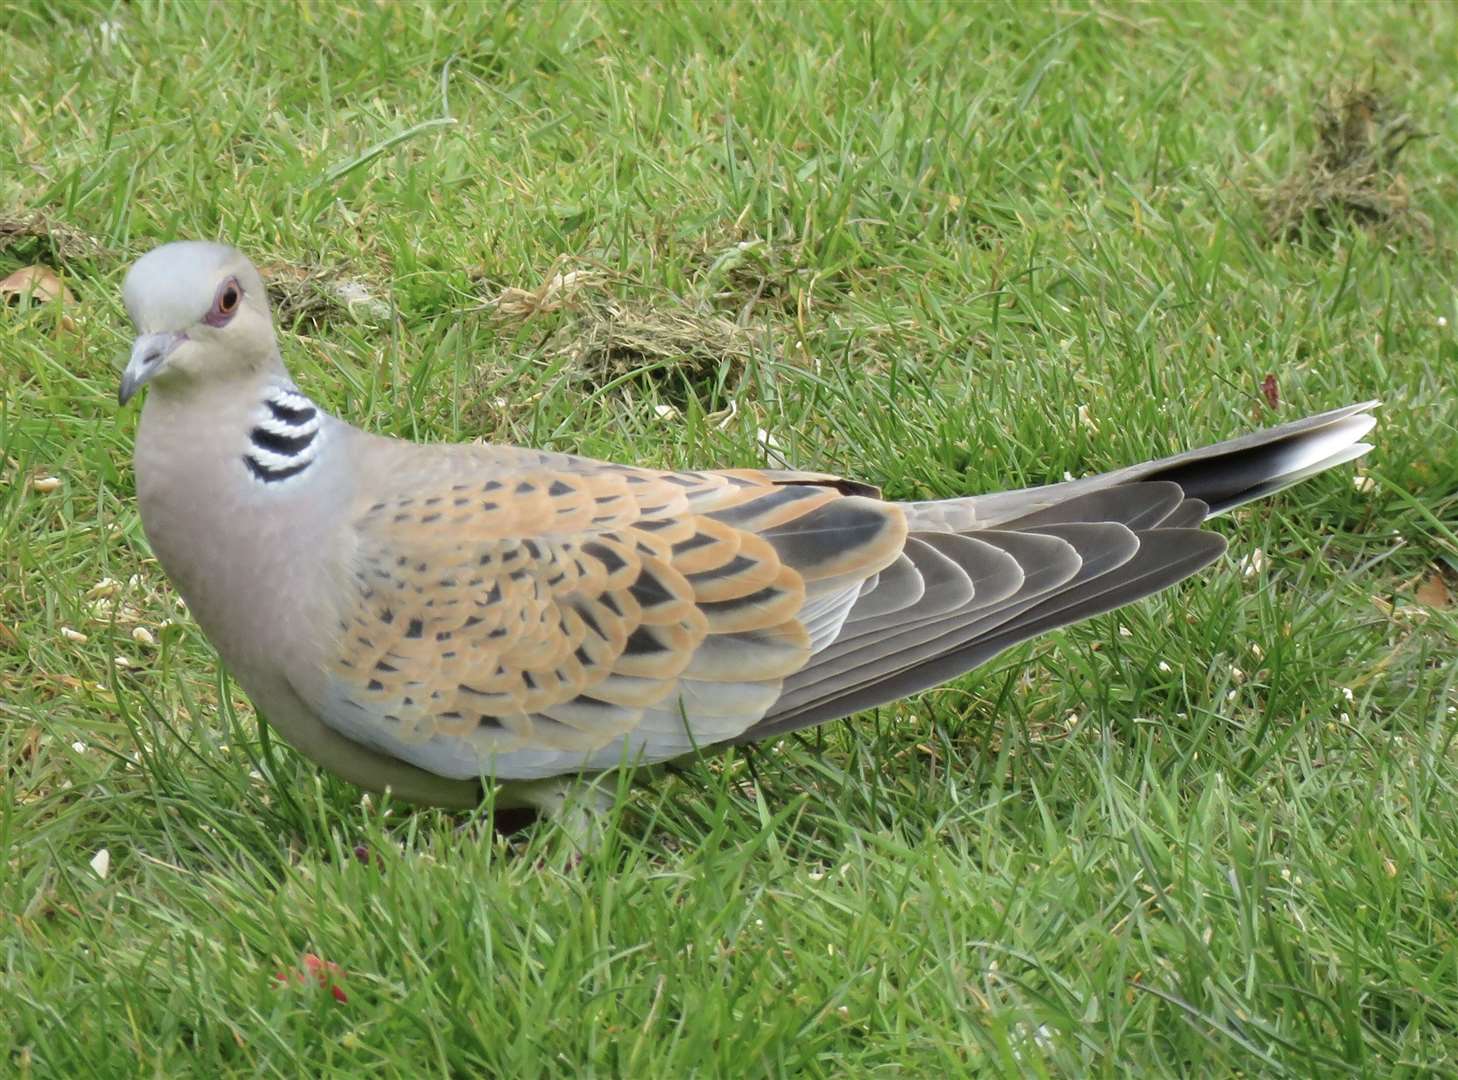 Turtle doves were heard 'purring' in the woods. Stock picture / John Brewin